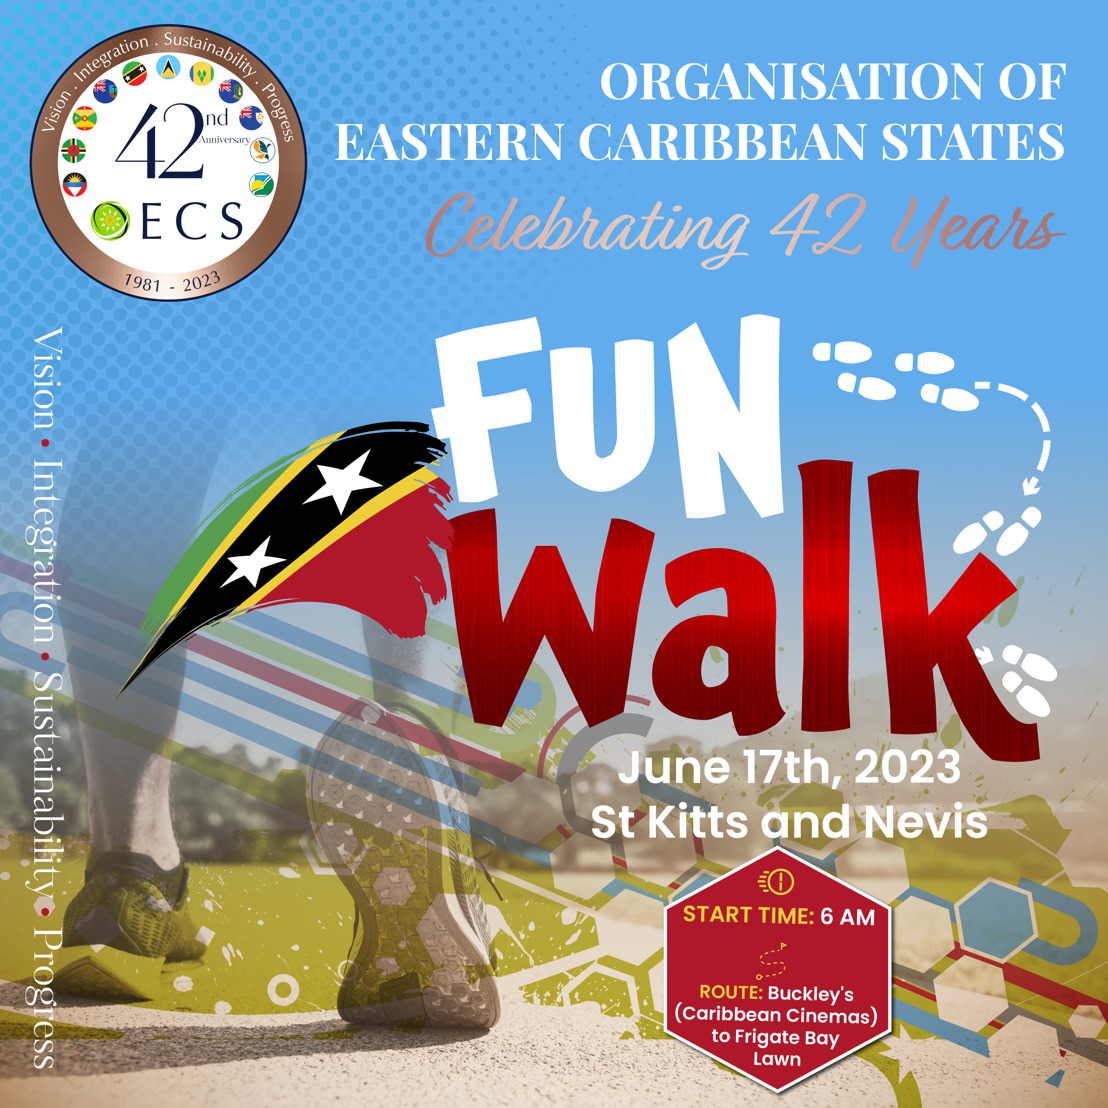 OECS to host Fun Walk in St Kitts and Nevis as part of  42nd Anniversary celebrations